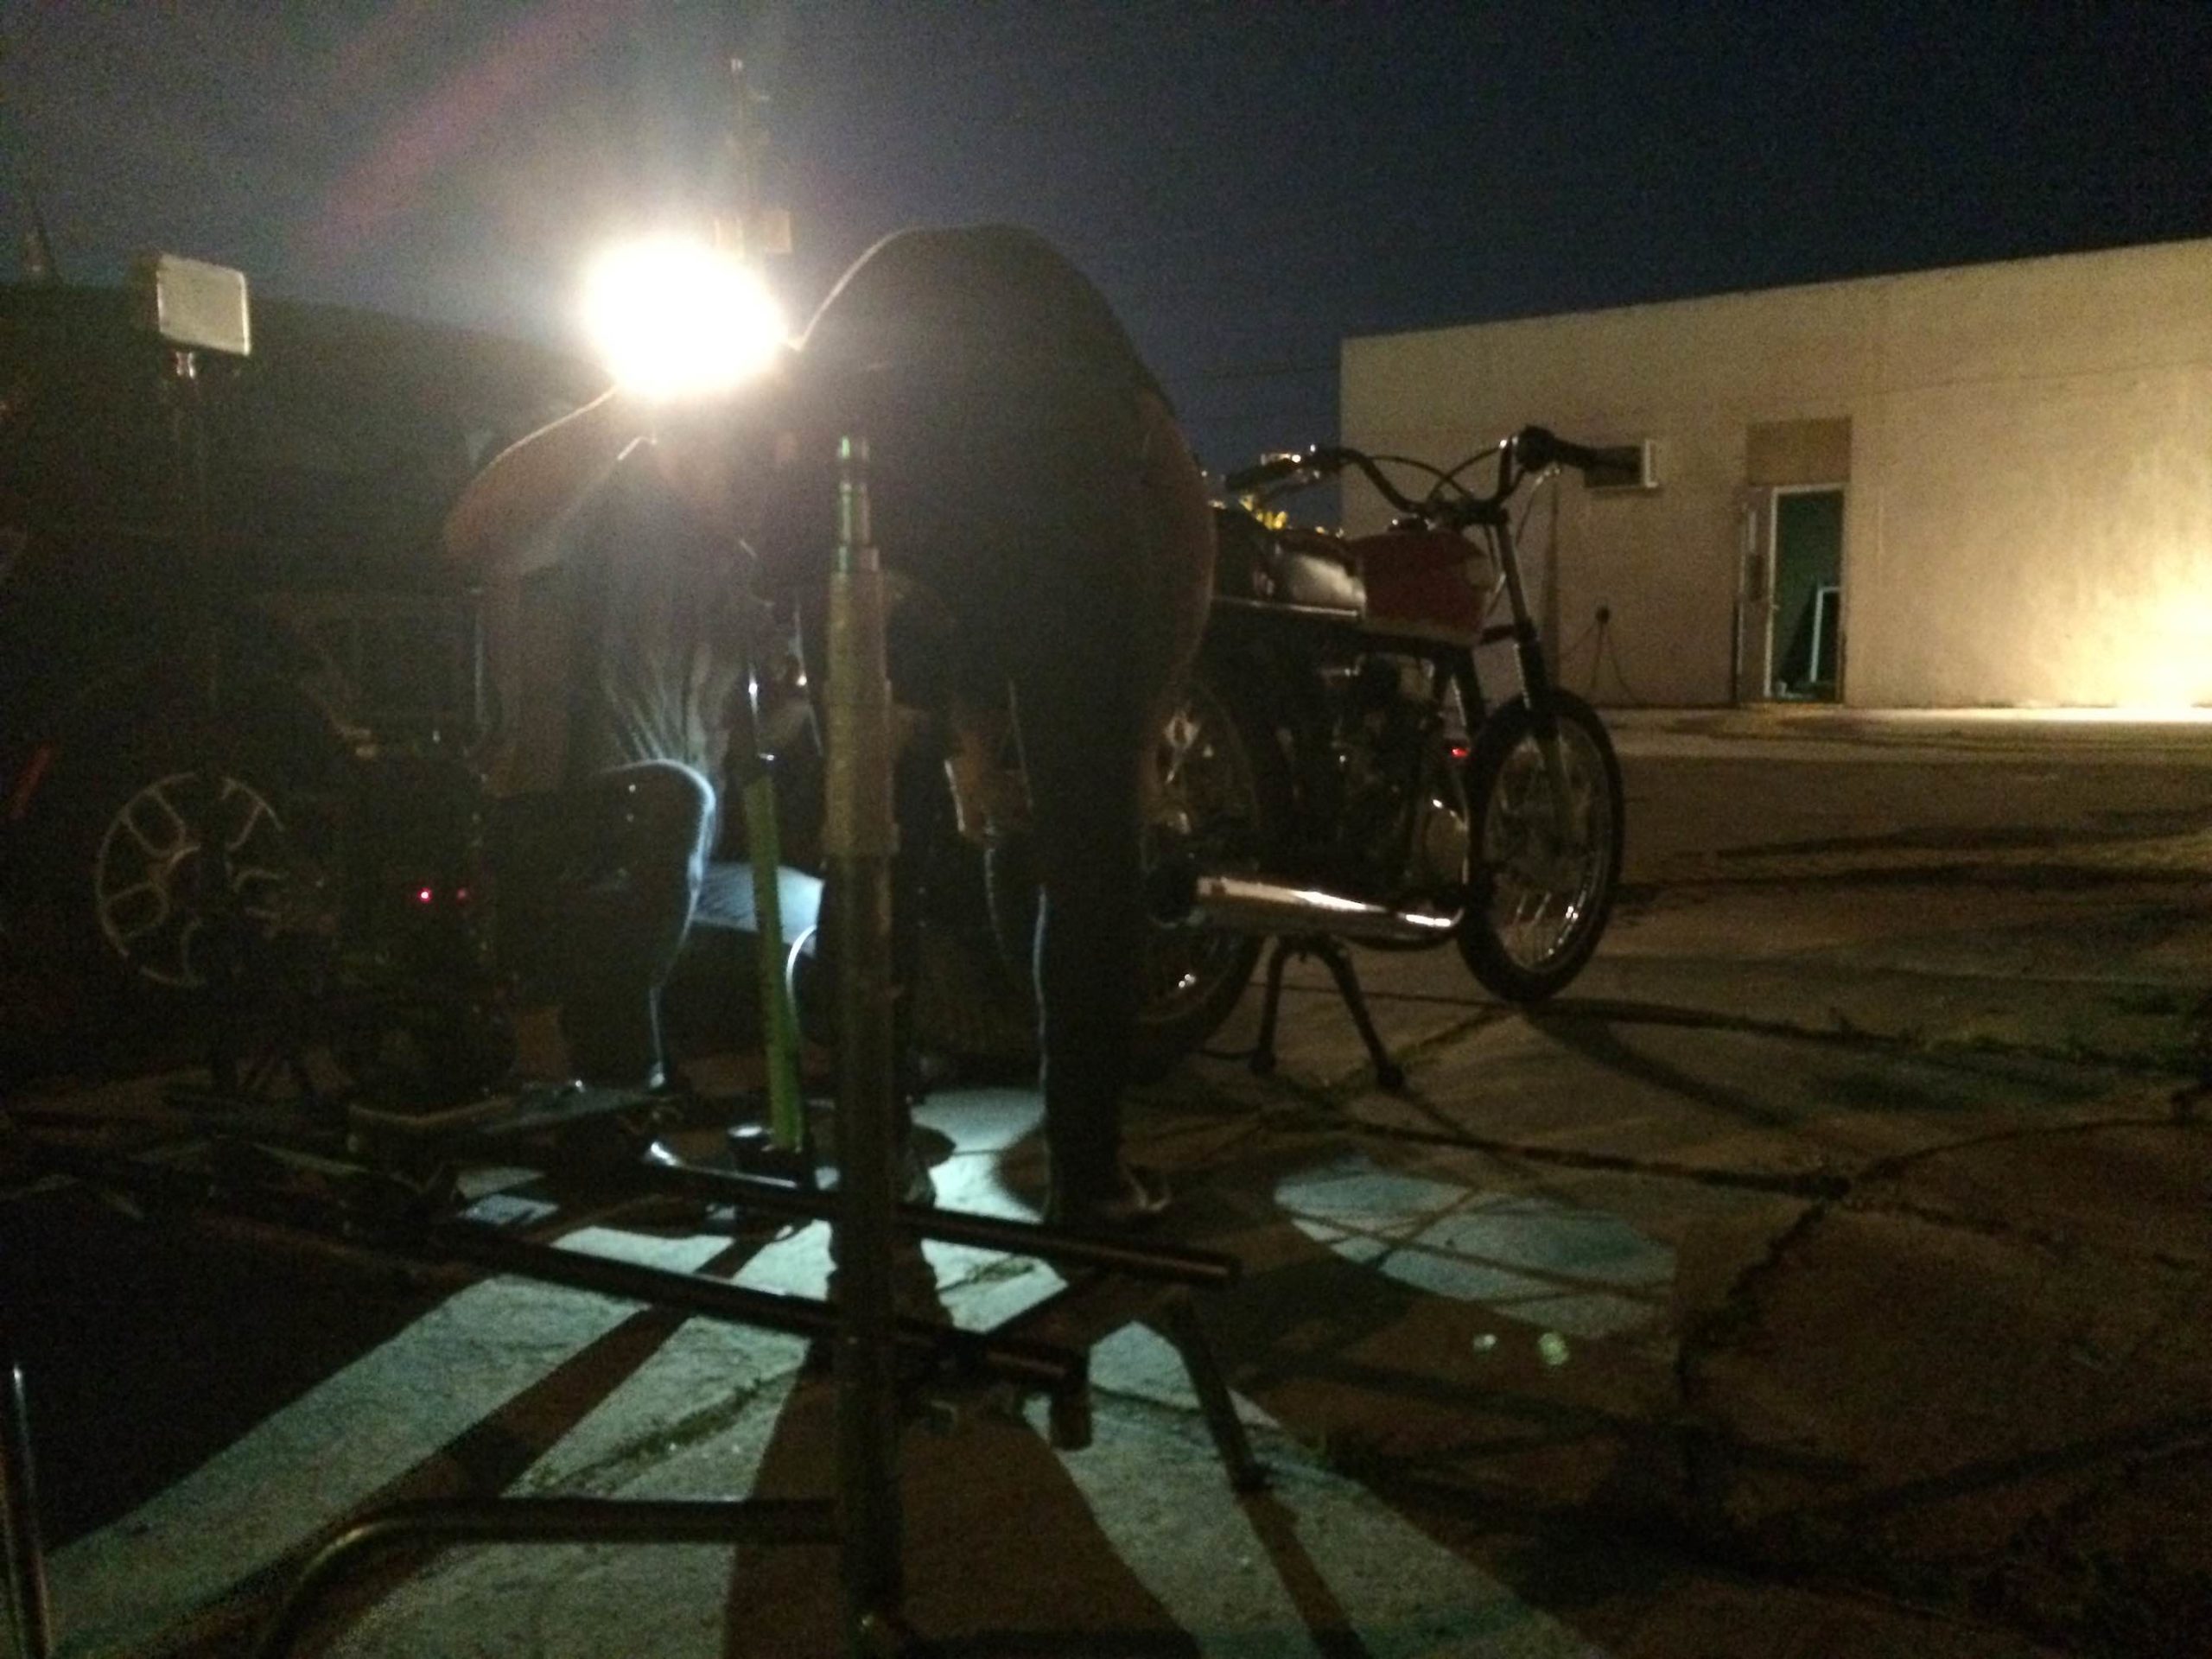 Crew members working near motorcycle in the dark with a light